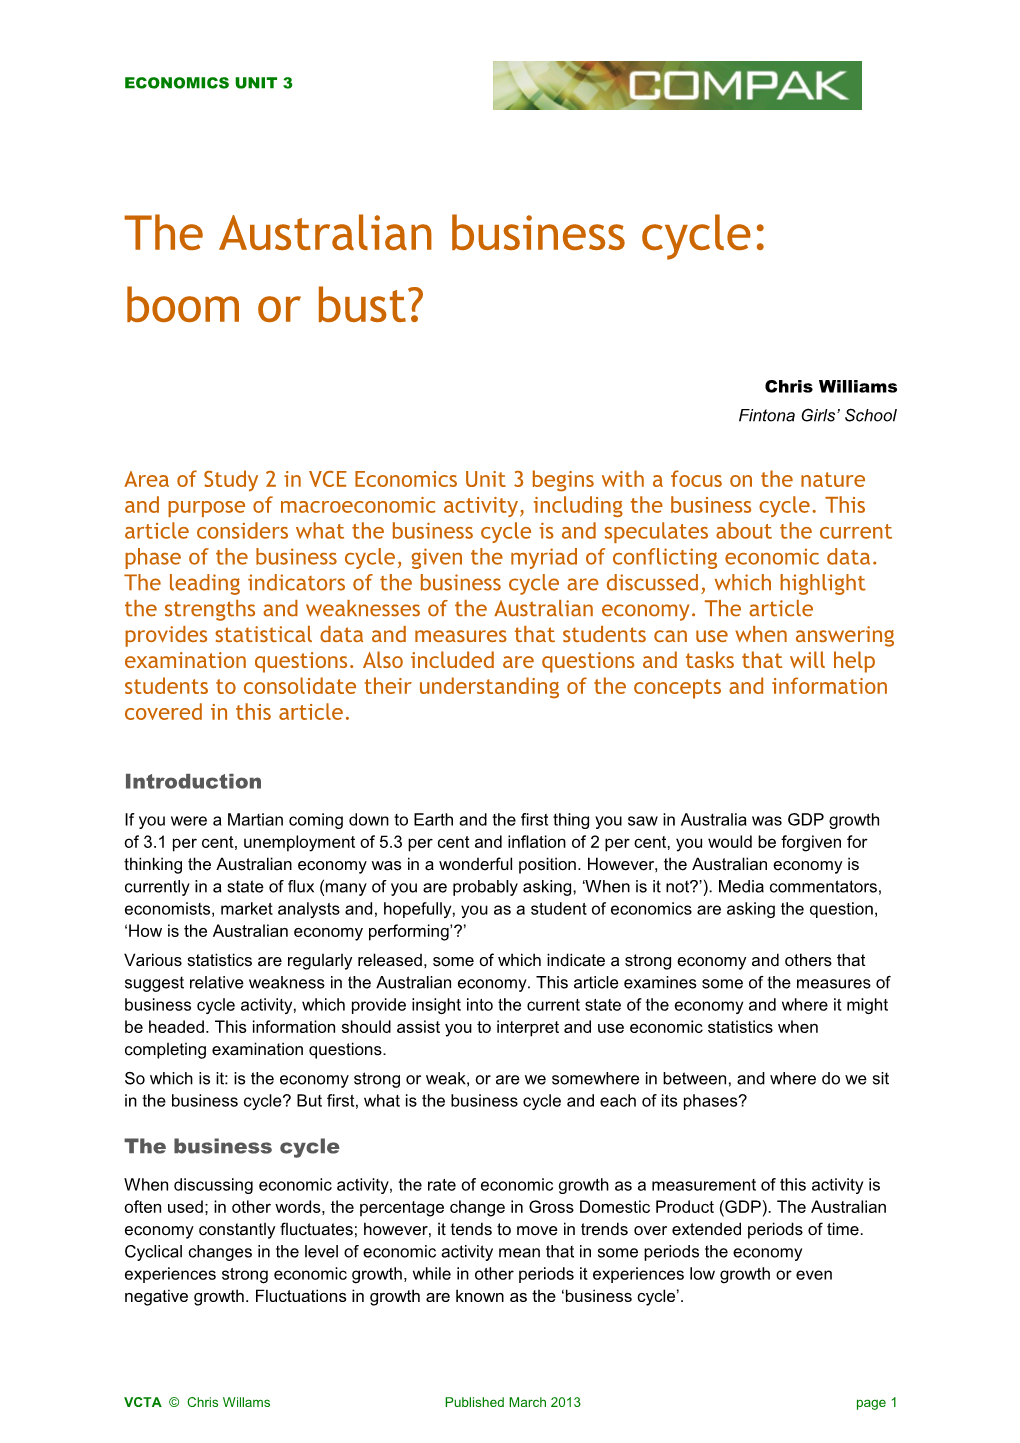 The Australian Business Cycle: Boom Or Bust?